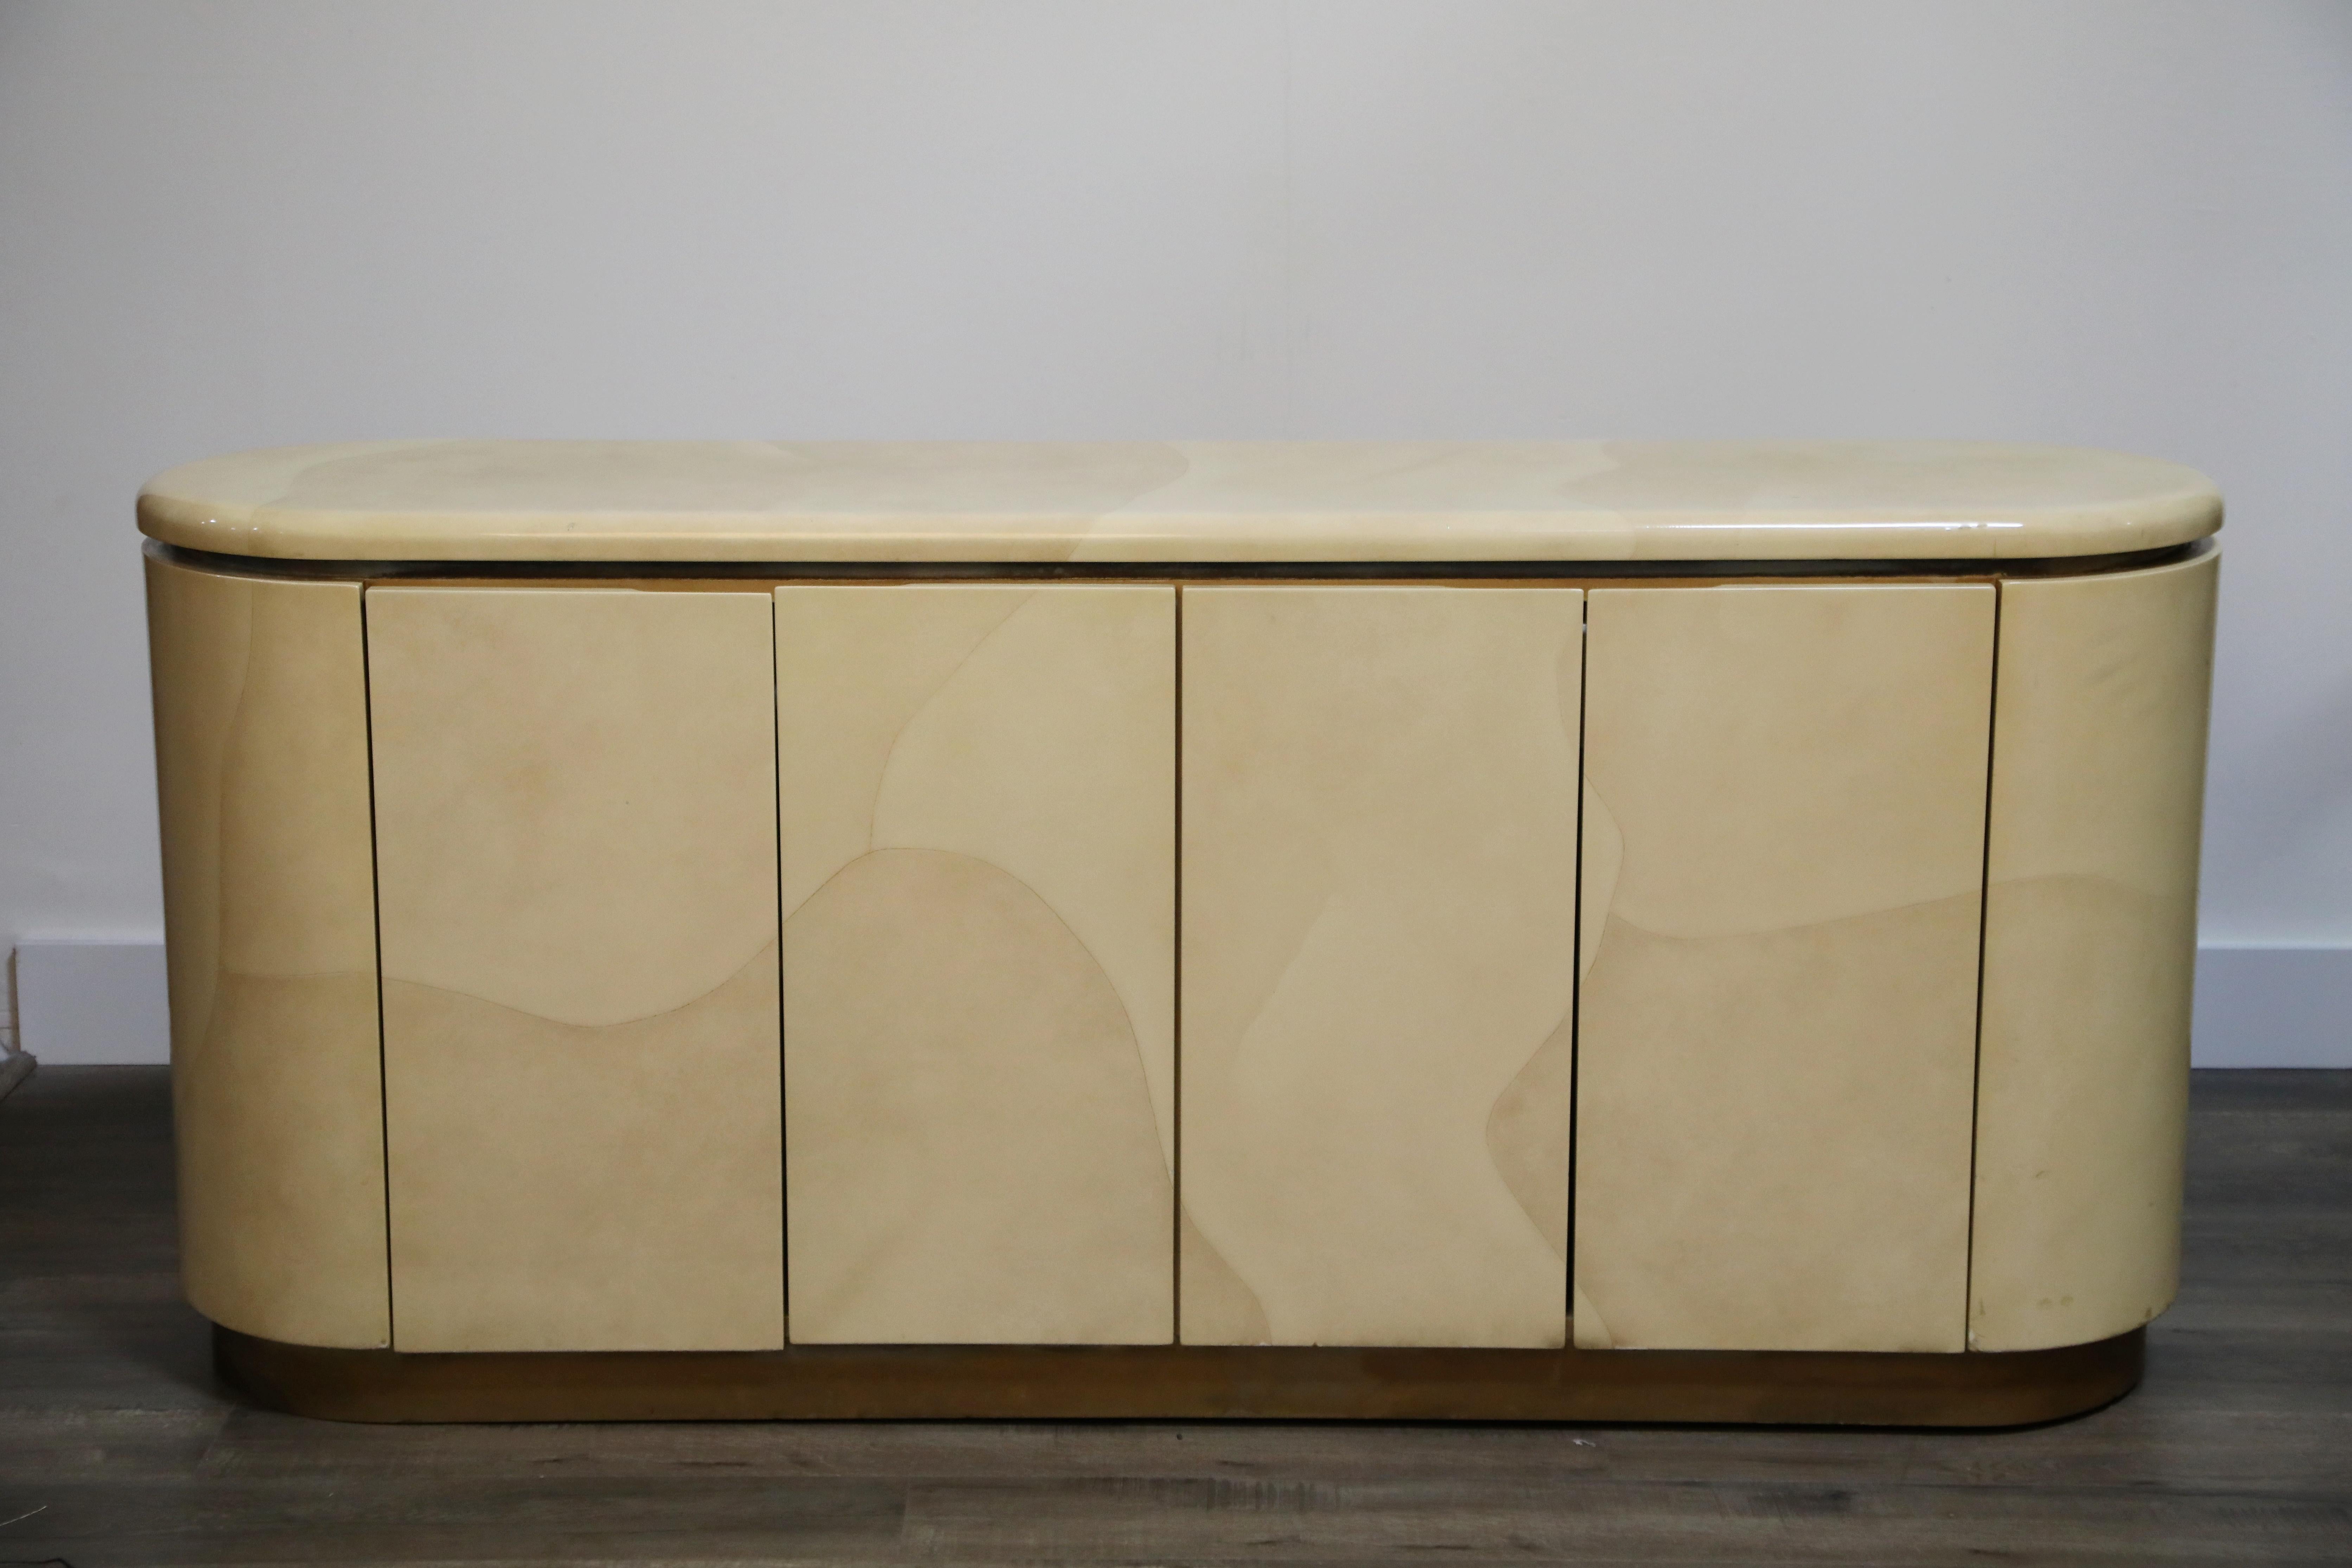 A lovely lacquered goatskin sideboard or credenza, with beautiful grain detail in the goatskin hides, in the style of Karl Springer and Steve Chase, circa 1970s. With a finished back it can also be used as a room divider. 

Four doors open to